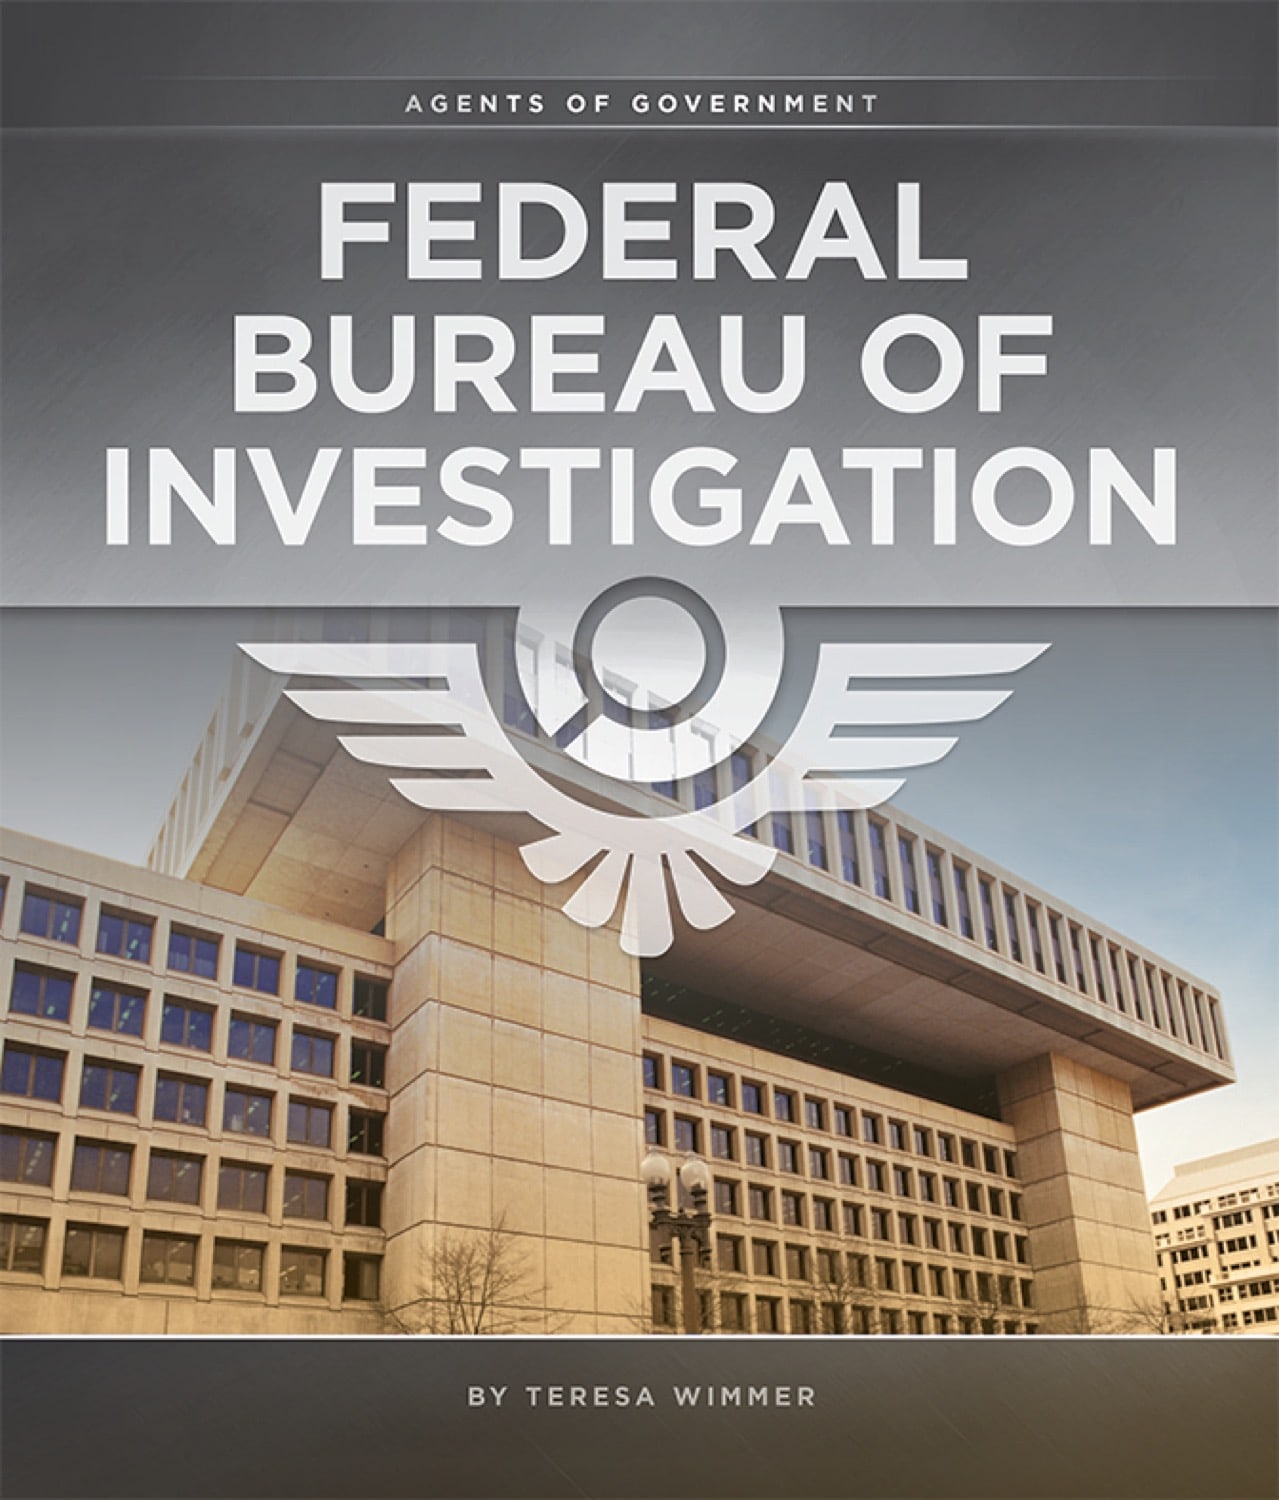 Agents of Government: Federal Bureau of Investigation